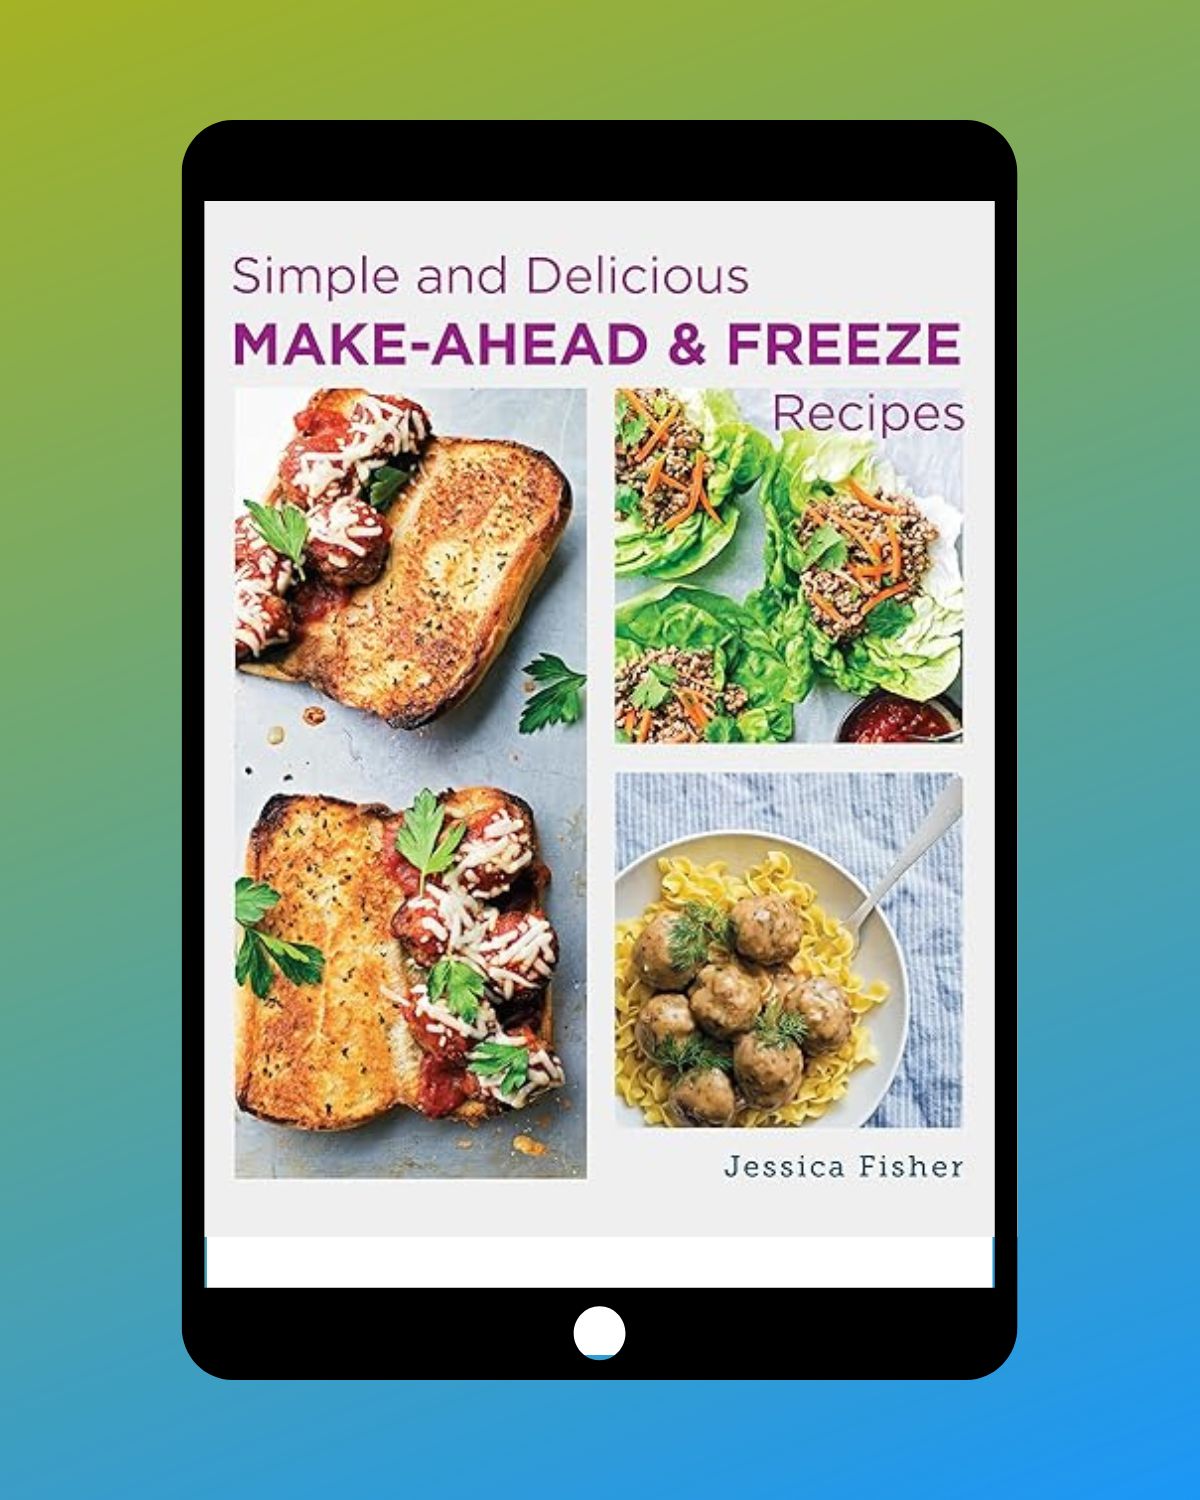 simple and delicious cookbook loaded on an ipad with a green and blue background.